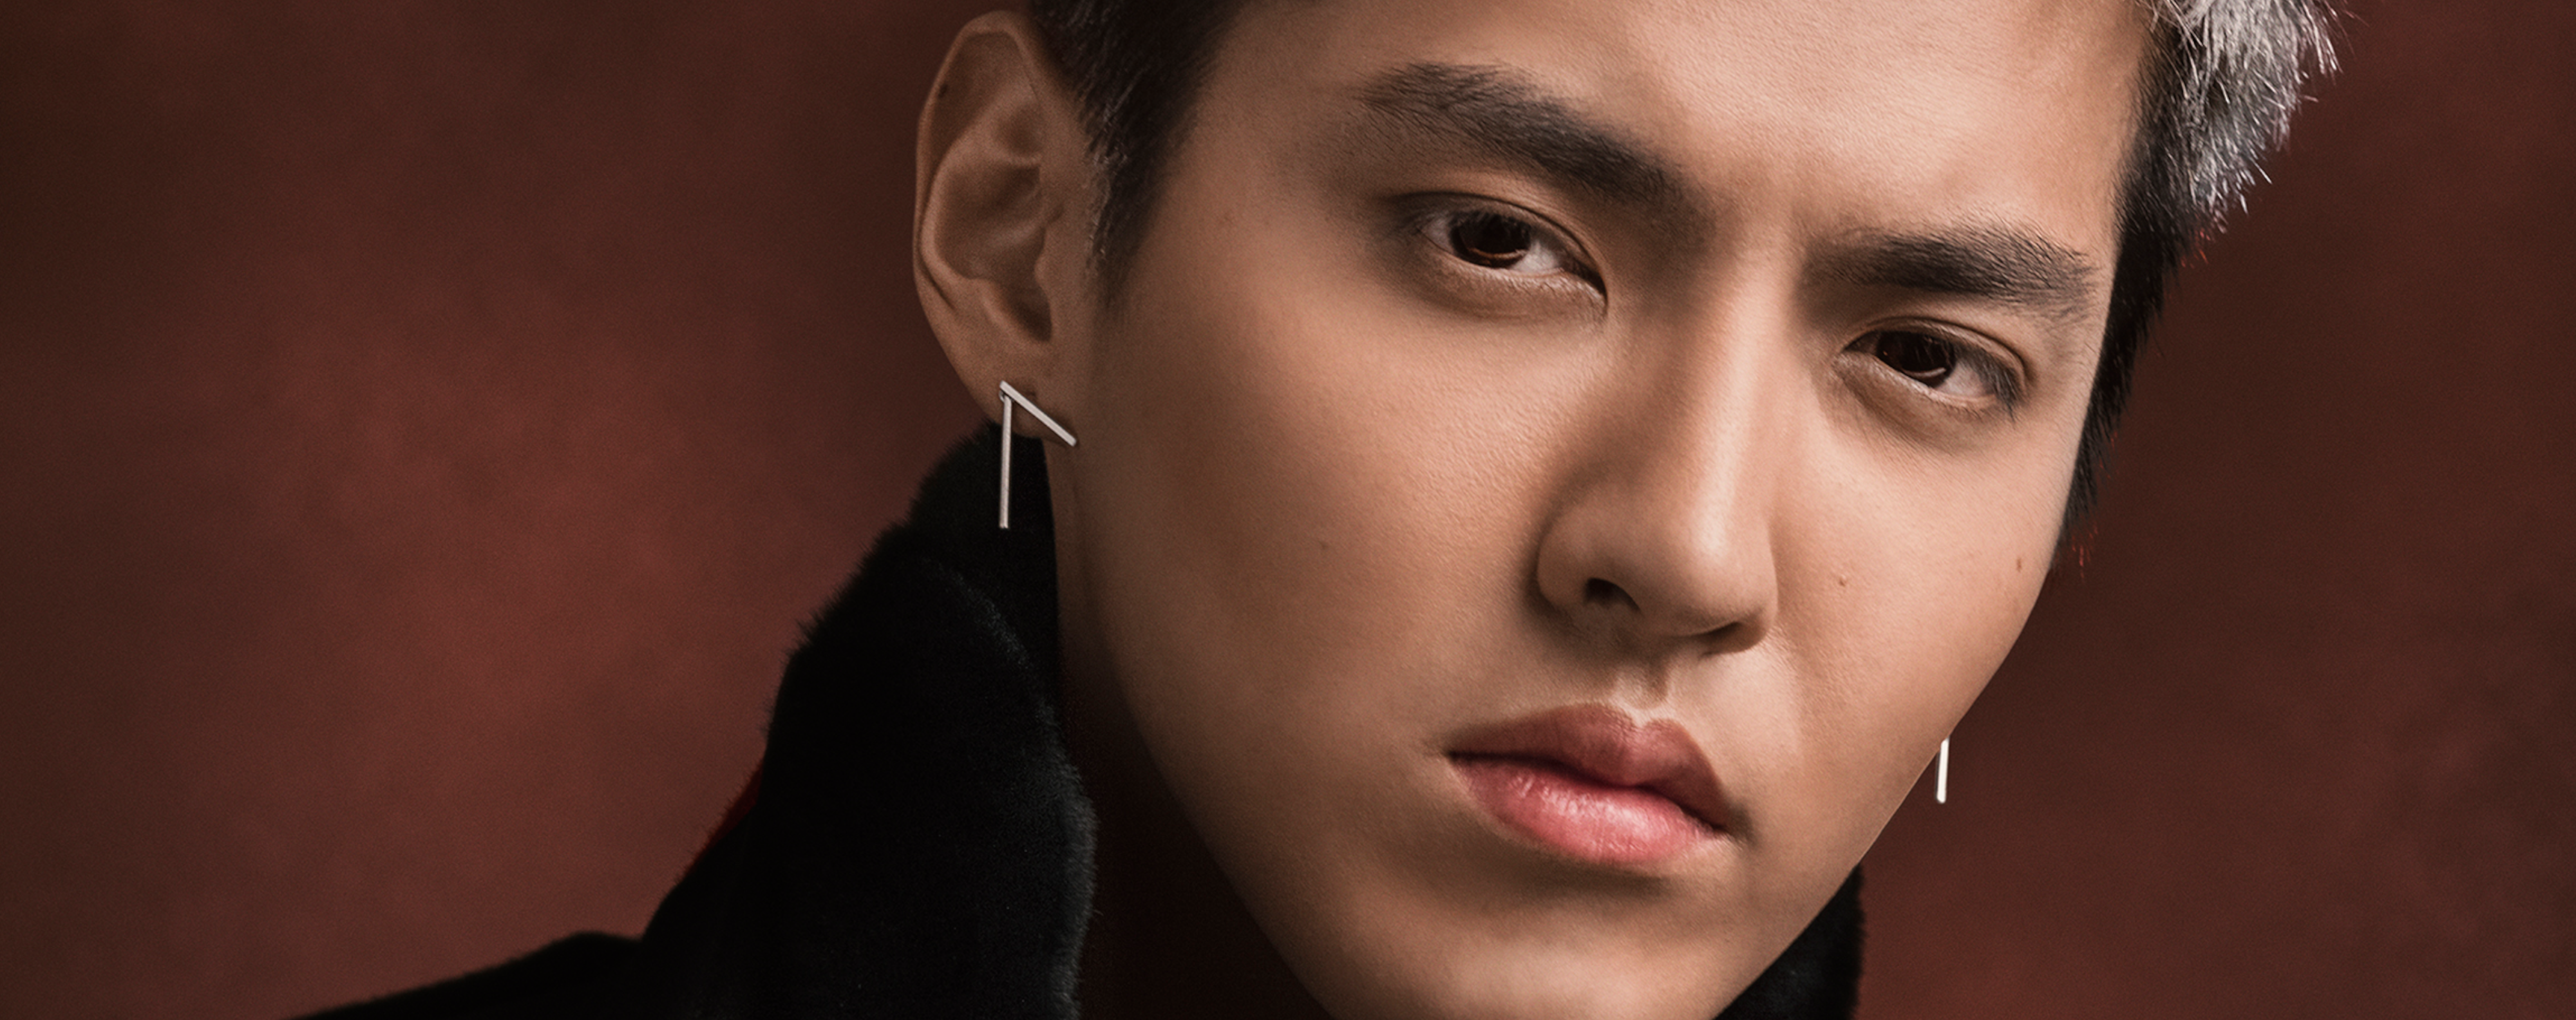 8 male Korean stars ruling the beauty world: from Astro's Cha Eun-woo's Dior  Beauty gig and Got7's Jackson Wang who reps Armani and Mac, to Exo's Kai in  YSL make-up and Lee